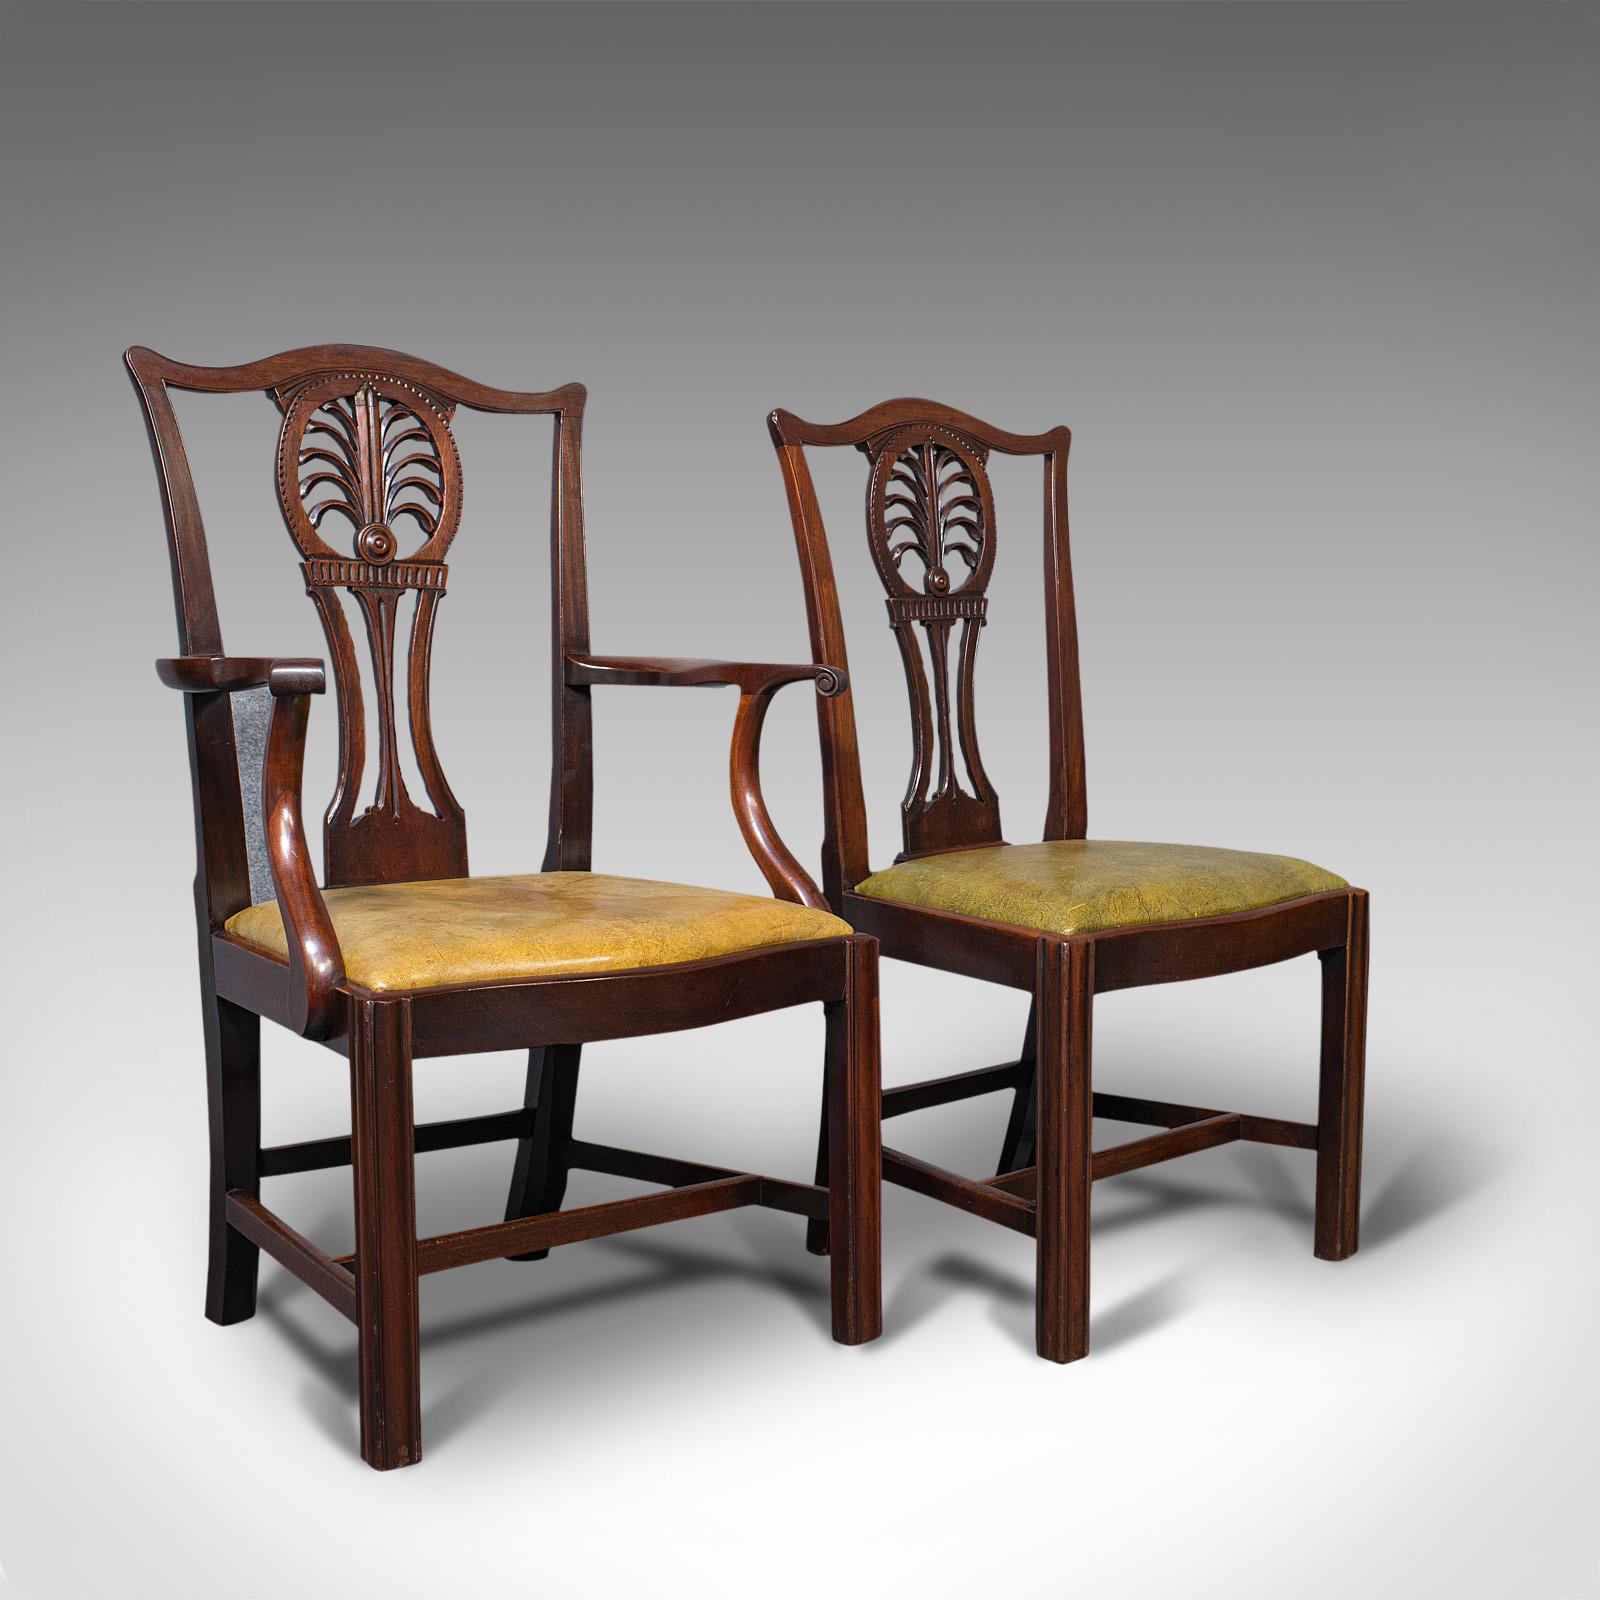 Antique, Set of 6, Dining Chairs, English, Mahogany, Leather, Seats, Victorian In Good Condition For Sale In Hele, Devon, GB